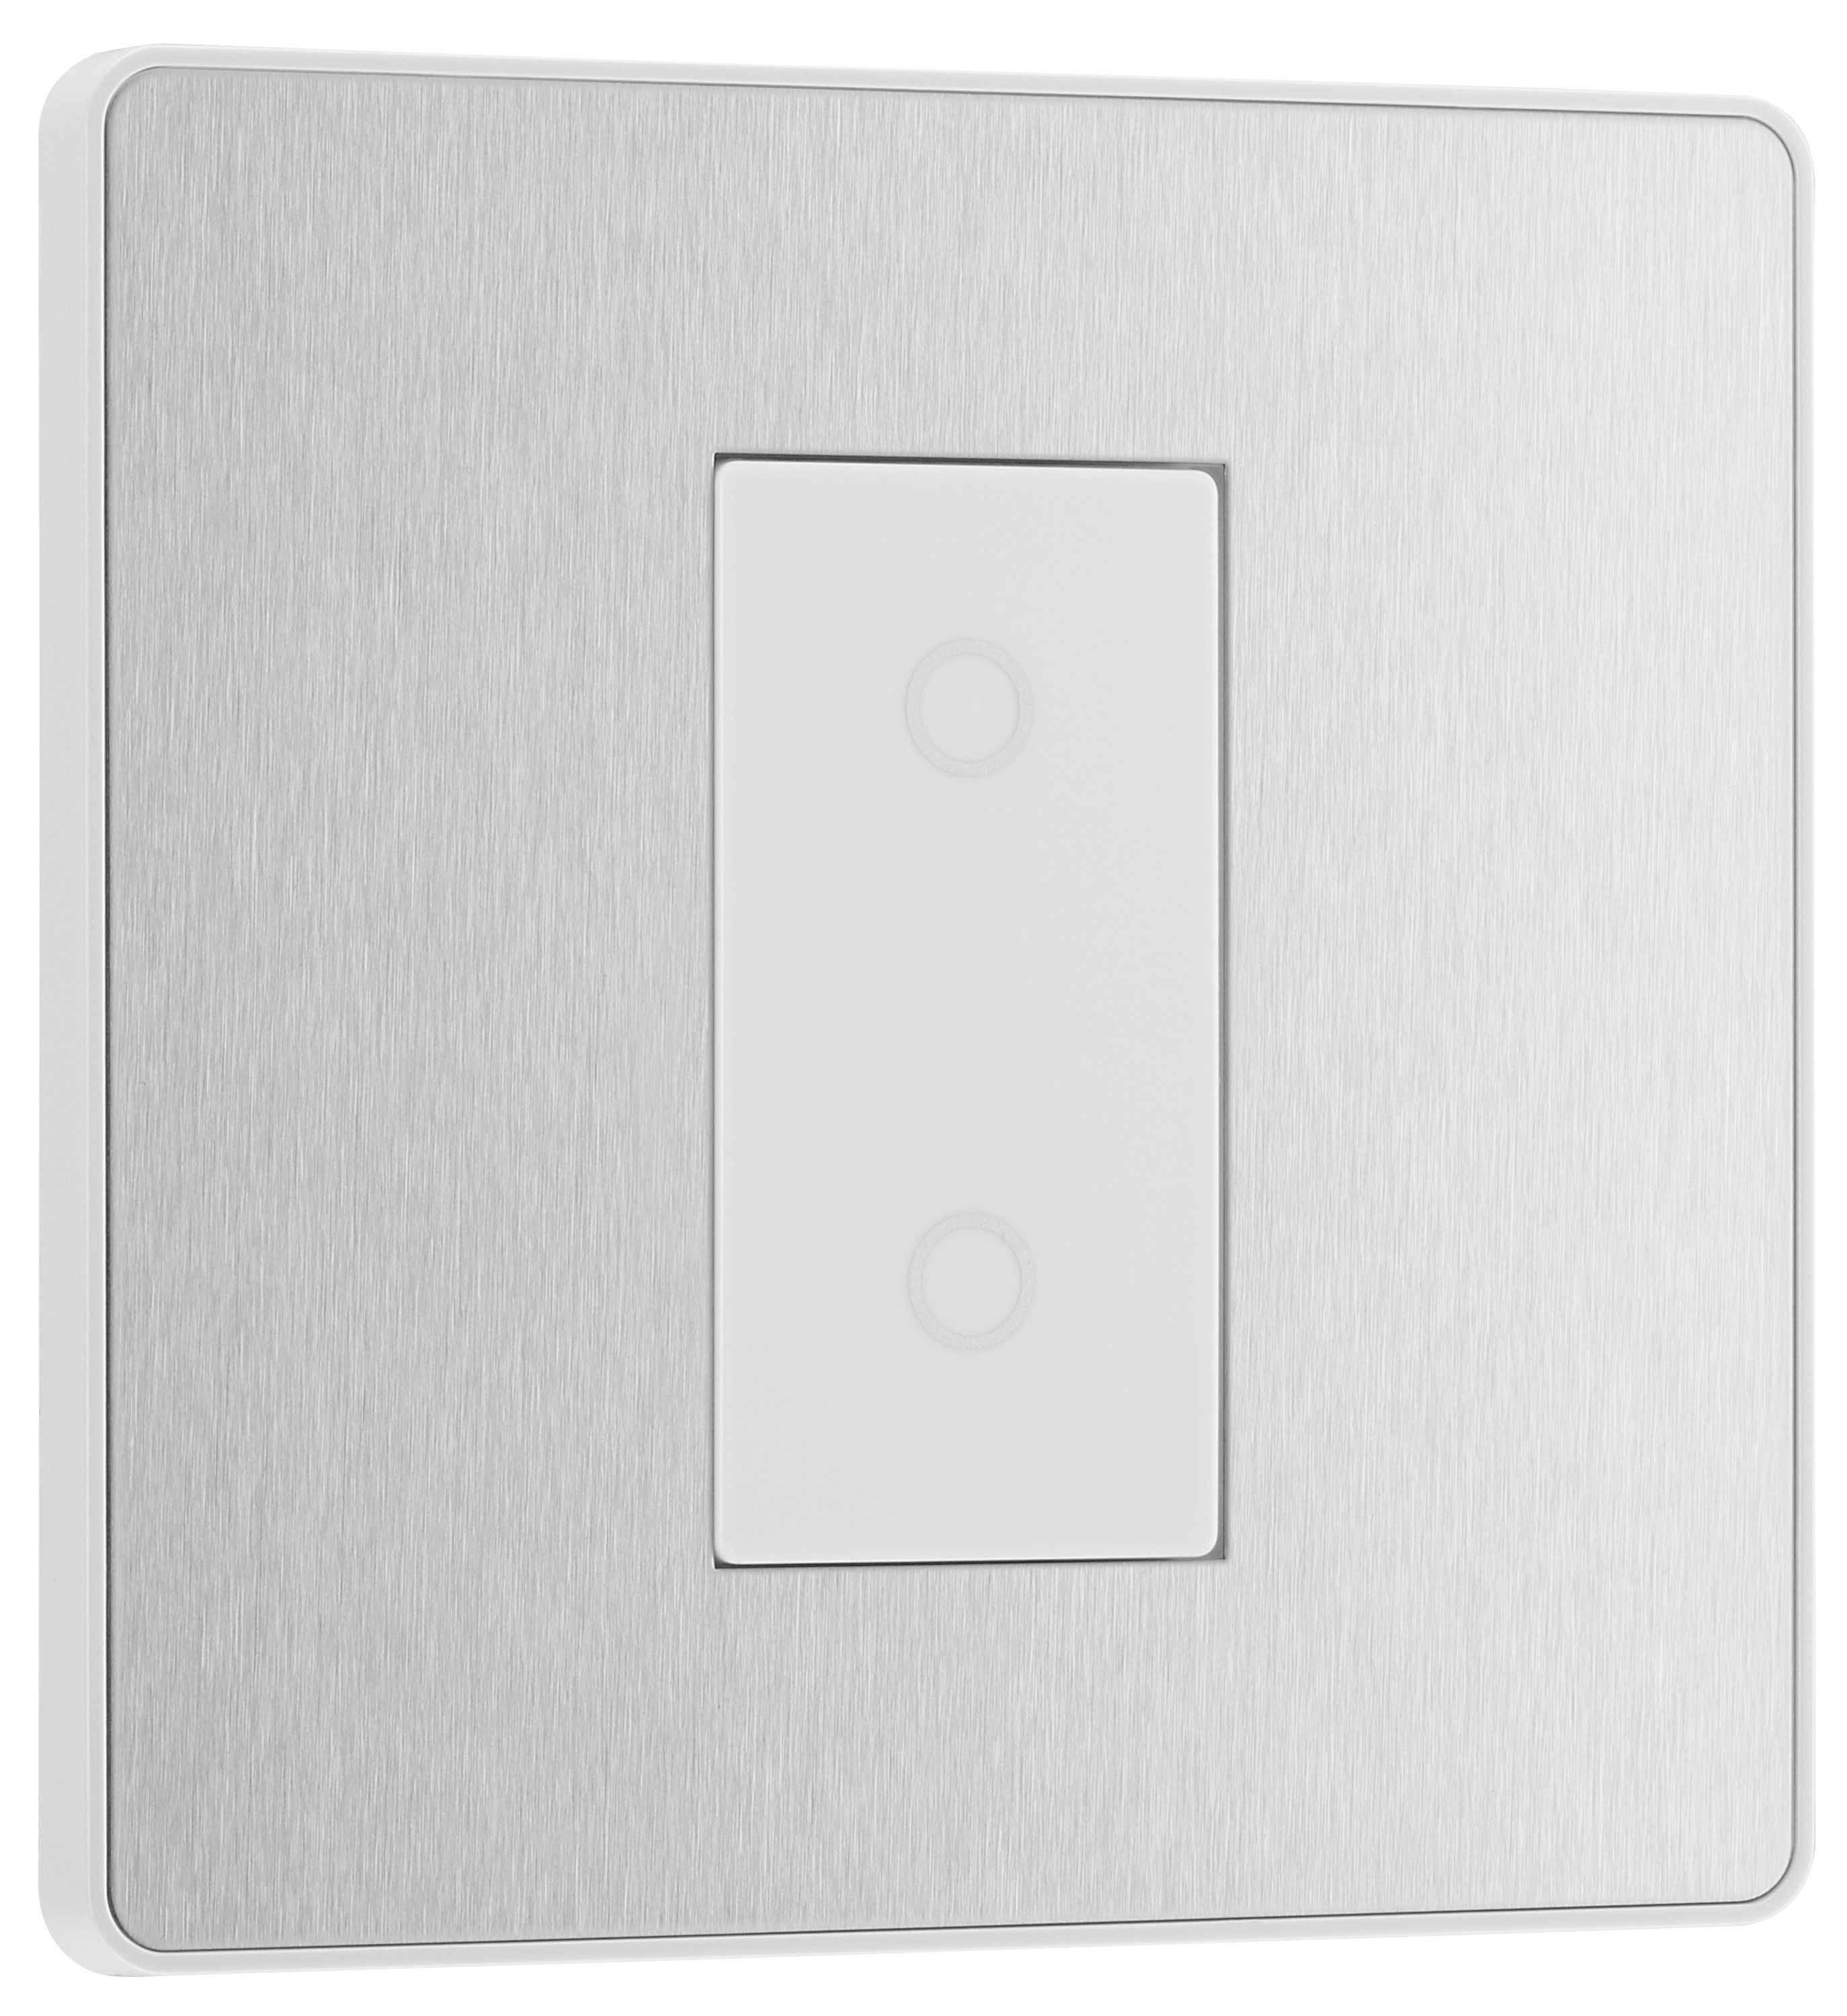 Image of BG Evolve Brushed Steel 2 Way Secondary Single Touch Dimmer Switch - 200W